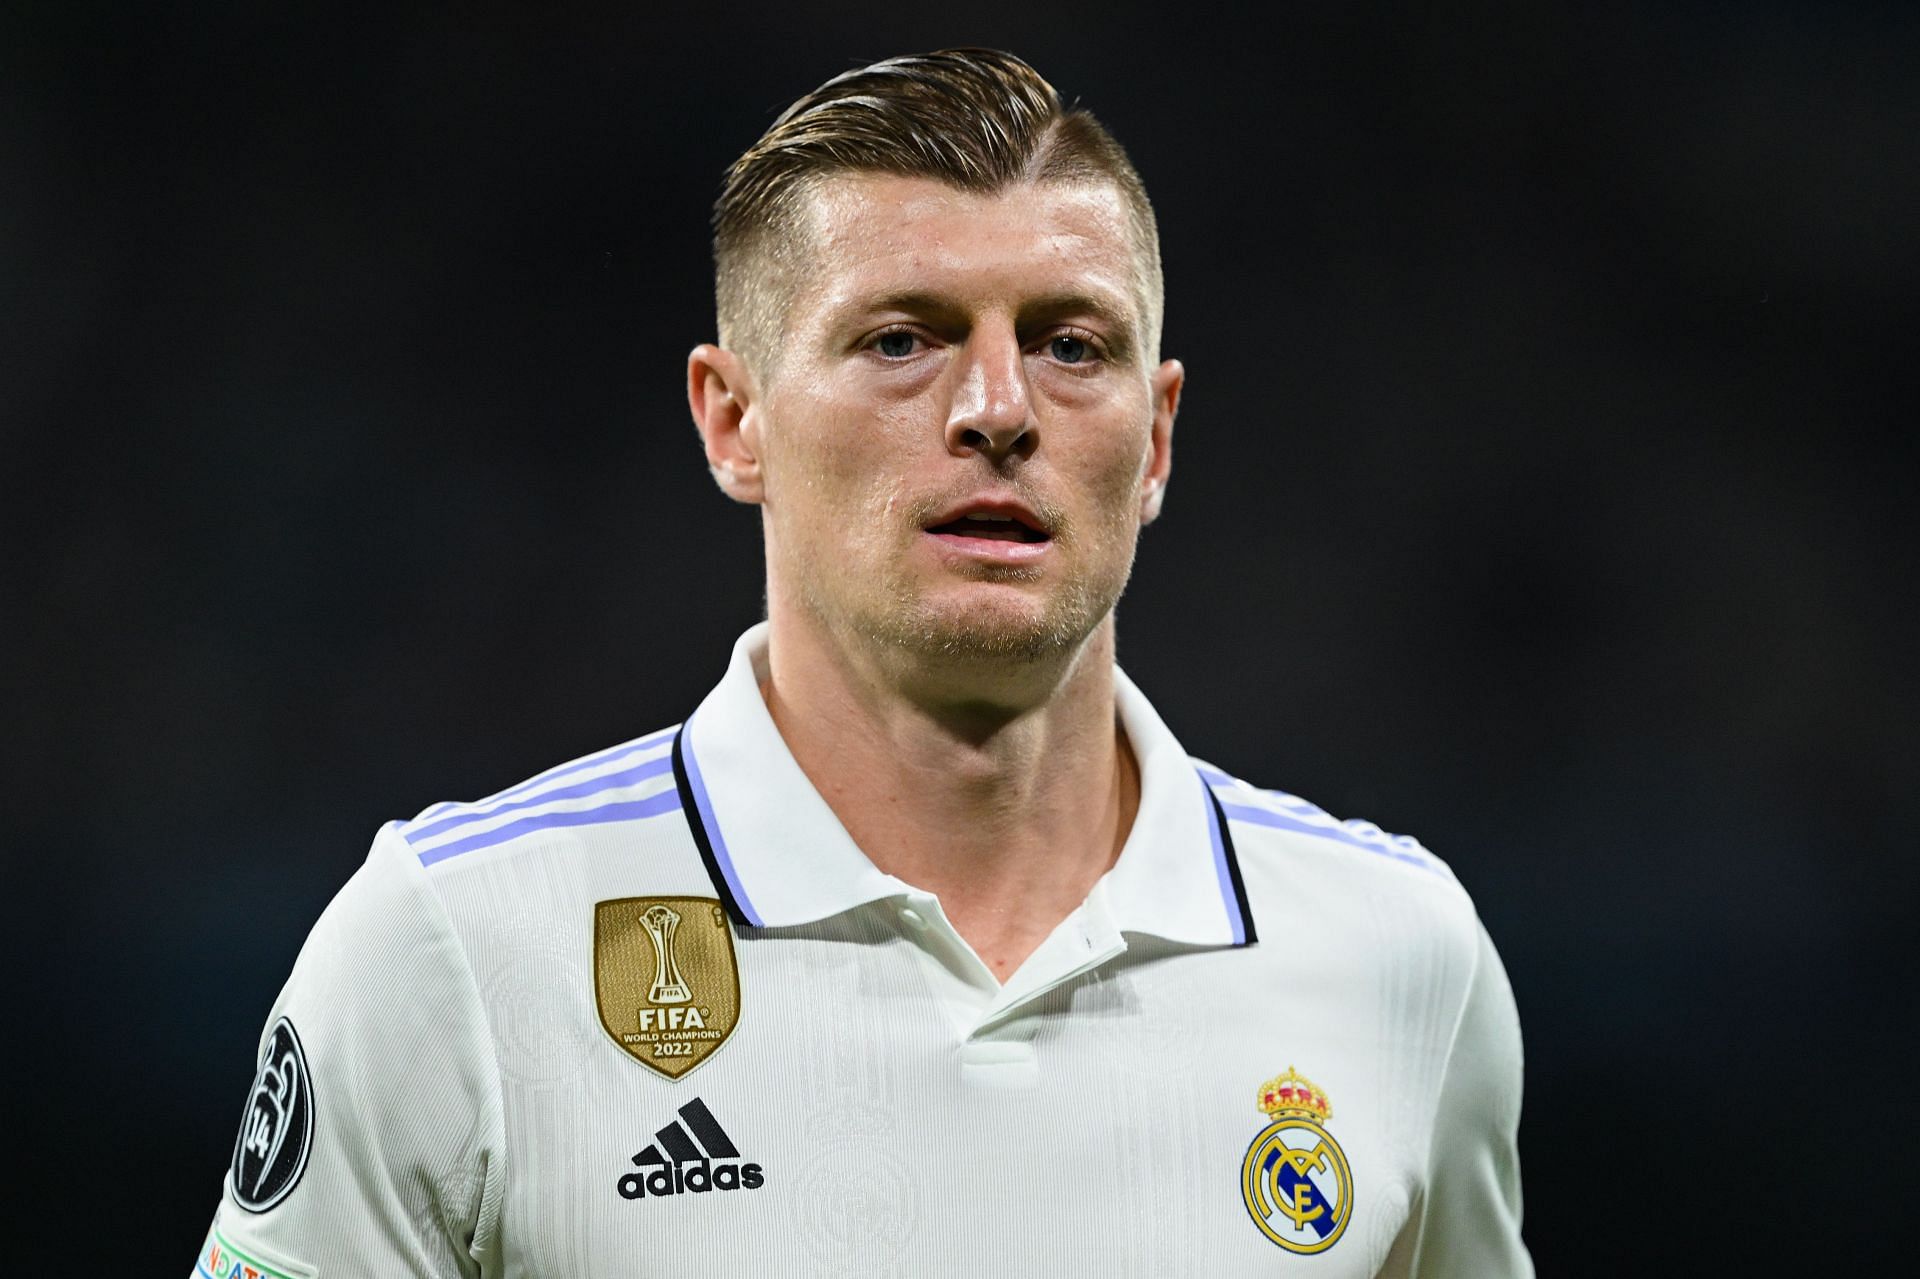 Toni Kroos has opted to continue his stay at the Santiago Bernabeu.